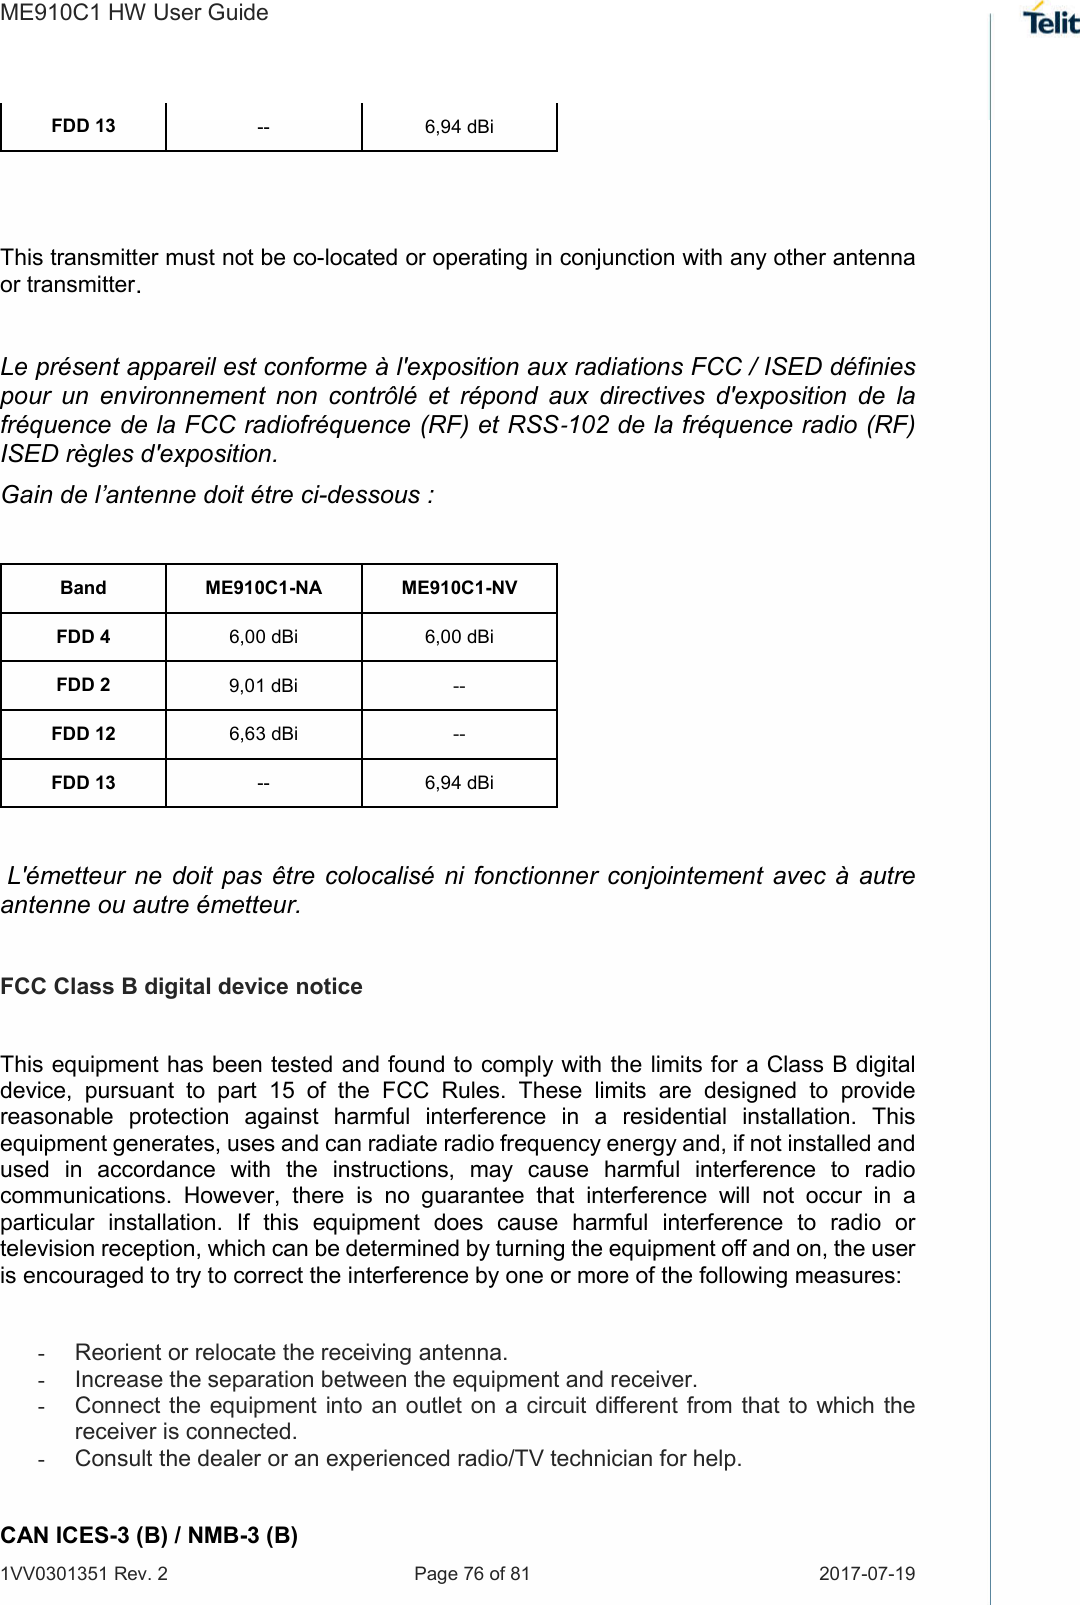 ME910C1 HW User Guide 1VV0301351 Rev. 2  Page 76 of 81  2017-07-19  FDD 13  --  6,94 dBi   This transmitter must not be co-located or operating in conjunction with any other antenna or transmitter.  Le présent appareil est conforme à l&apos;exposition aux radiations FCC / ISED définies pour  un  environnement  non  contrôlé  et  répond  aux  directives  d&apos;exposition  de  la fréquence de la FCC radiofréquence (RF) et RSS‐102 de la fréquence radio (RF) ISED règles d&apos;exposition. Gain de l’antenne doit étre ci-dessous :  Band  ME910C1-NA  ME910C1-NV FDD 4  6,00 dBi  6,00 dBi FDD 2  9,01 dBi   -- FDD 12  6,63 dBi  -- FDD 13  --  6,94 dBi   L&apos;émetteur  ne  doit pas  être  colocalisé ni  fonctionner conjointement  avec à  autre antenne ou autre émetteur.  FCC Class B digital device notice  This equipment has been tested and found to comply with the limits for a Class B digital device,  pursuant  to  part  15  of  the  FCC  Rules.  These  limits  are  designed  to  provide reasonable  protection  against  harmful  interference  in  a  residential  installation.  This equipment generates, uses and can radiate radio frequency energy and, if not installed and used  in  accordance  with  the  instructions,  may  cause  harmful  interference  to  radio communications.  However,  there  is  no  guarantee  that  interference  will  not  occur  in  a particular  installation.  If  this  equipment  does  cause  harmful  interference  to  radio  or television reception, which can be determined by turning the equipment off and on, the user is encouraged to try to correct the interference by one or more of the following measures:  -  Reorient or relocate the receiving antenna. -  Increase the separation between the equipment and receiver.  -  Connect the  equipment into an outlet on a circuit different from that to which the receiver is connected.  -  Consult the dealer or an experienced radio/TV technician for help.  CAN ICES-3 (B) / NMB-3 (B) 